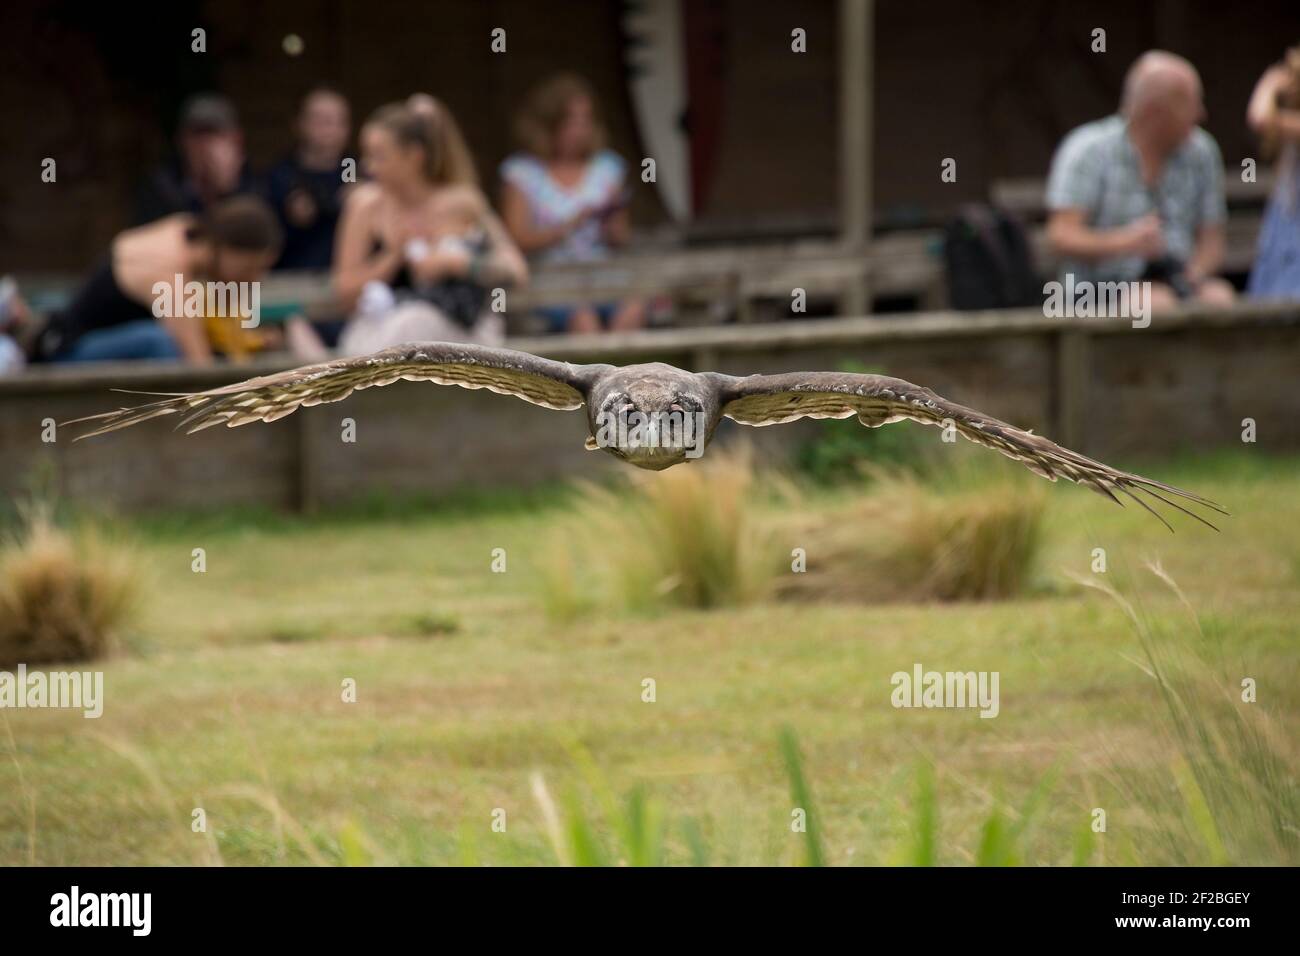 Verreaux's eagle-owl (Bubo lacteus) flying towards the camera at a fly display at the Hawk Conservancy Trust at Weyhill, August Stock Photo